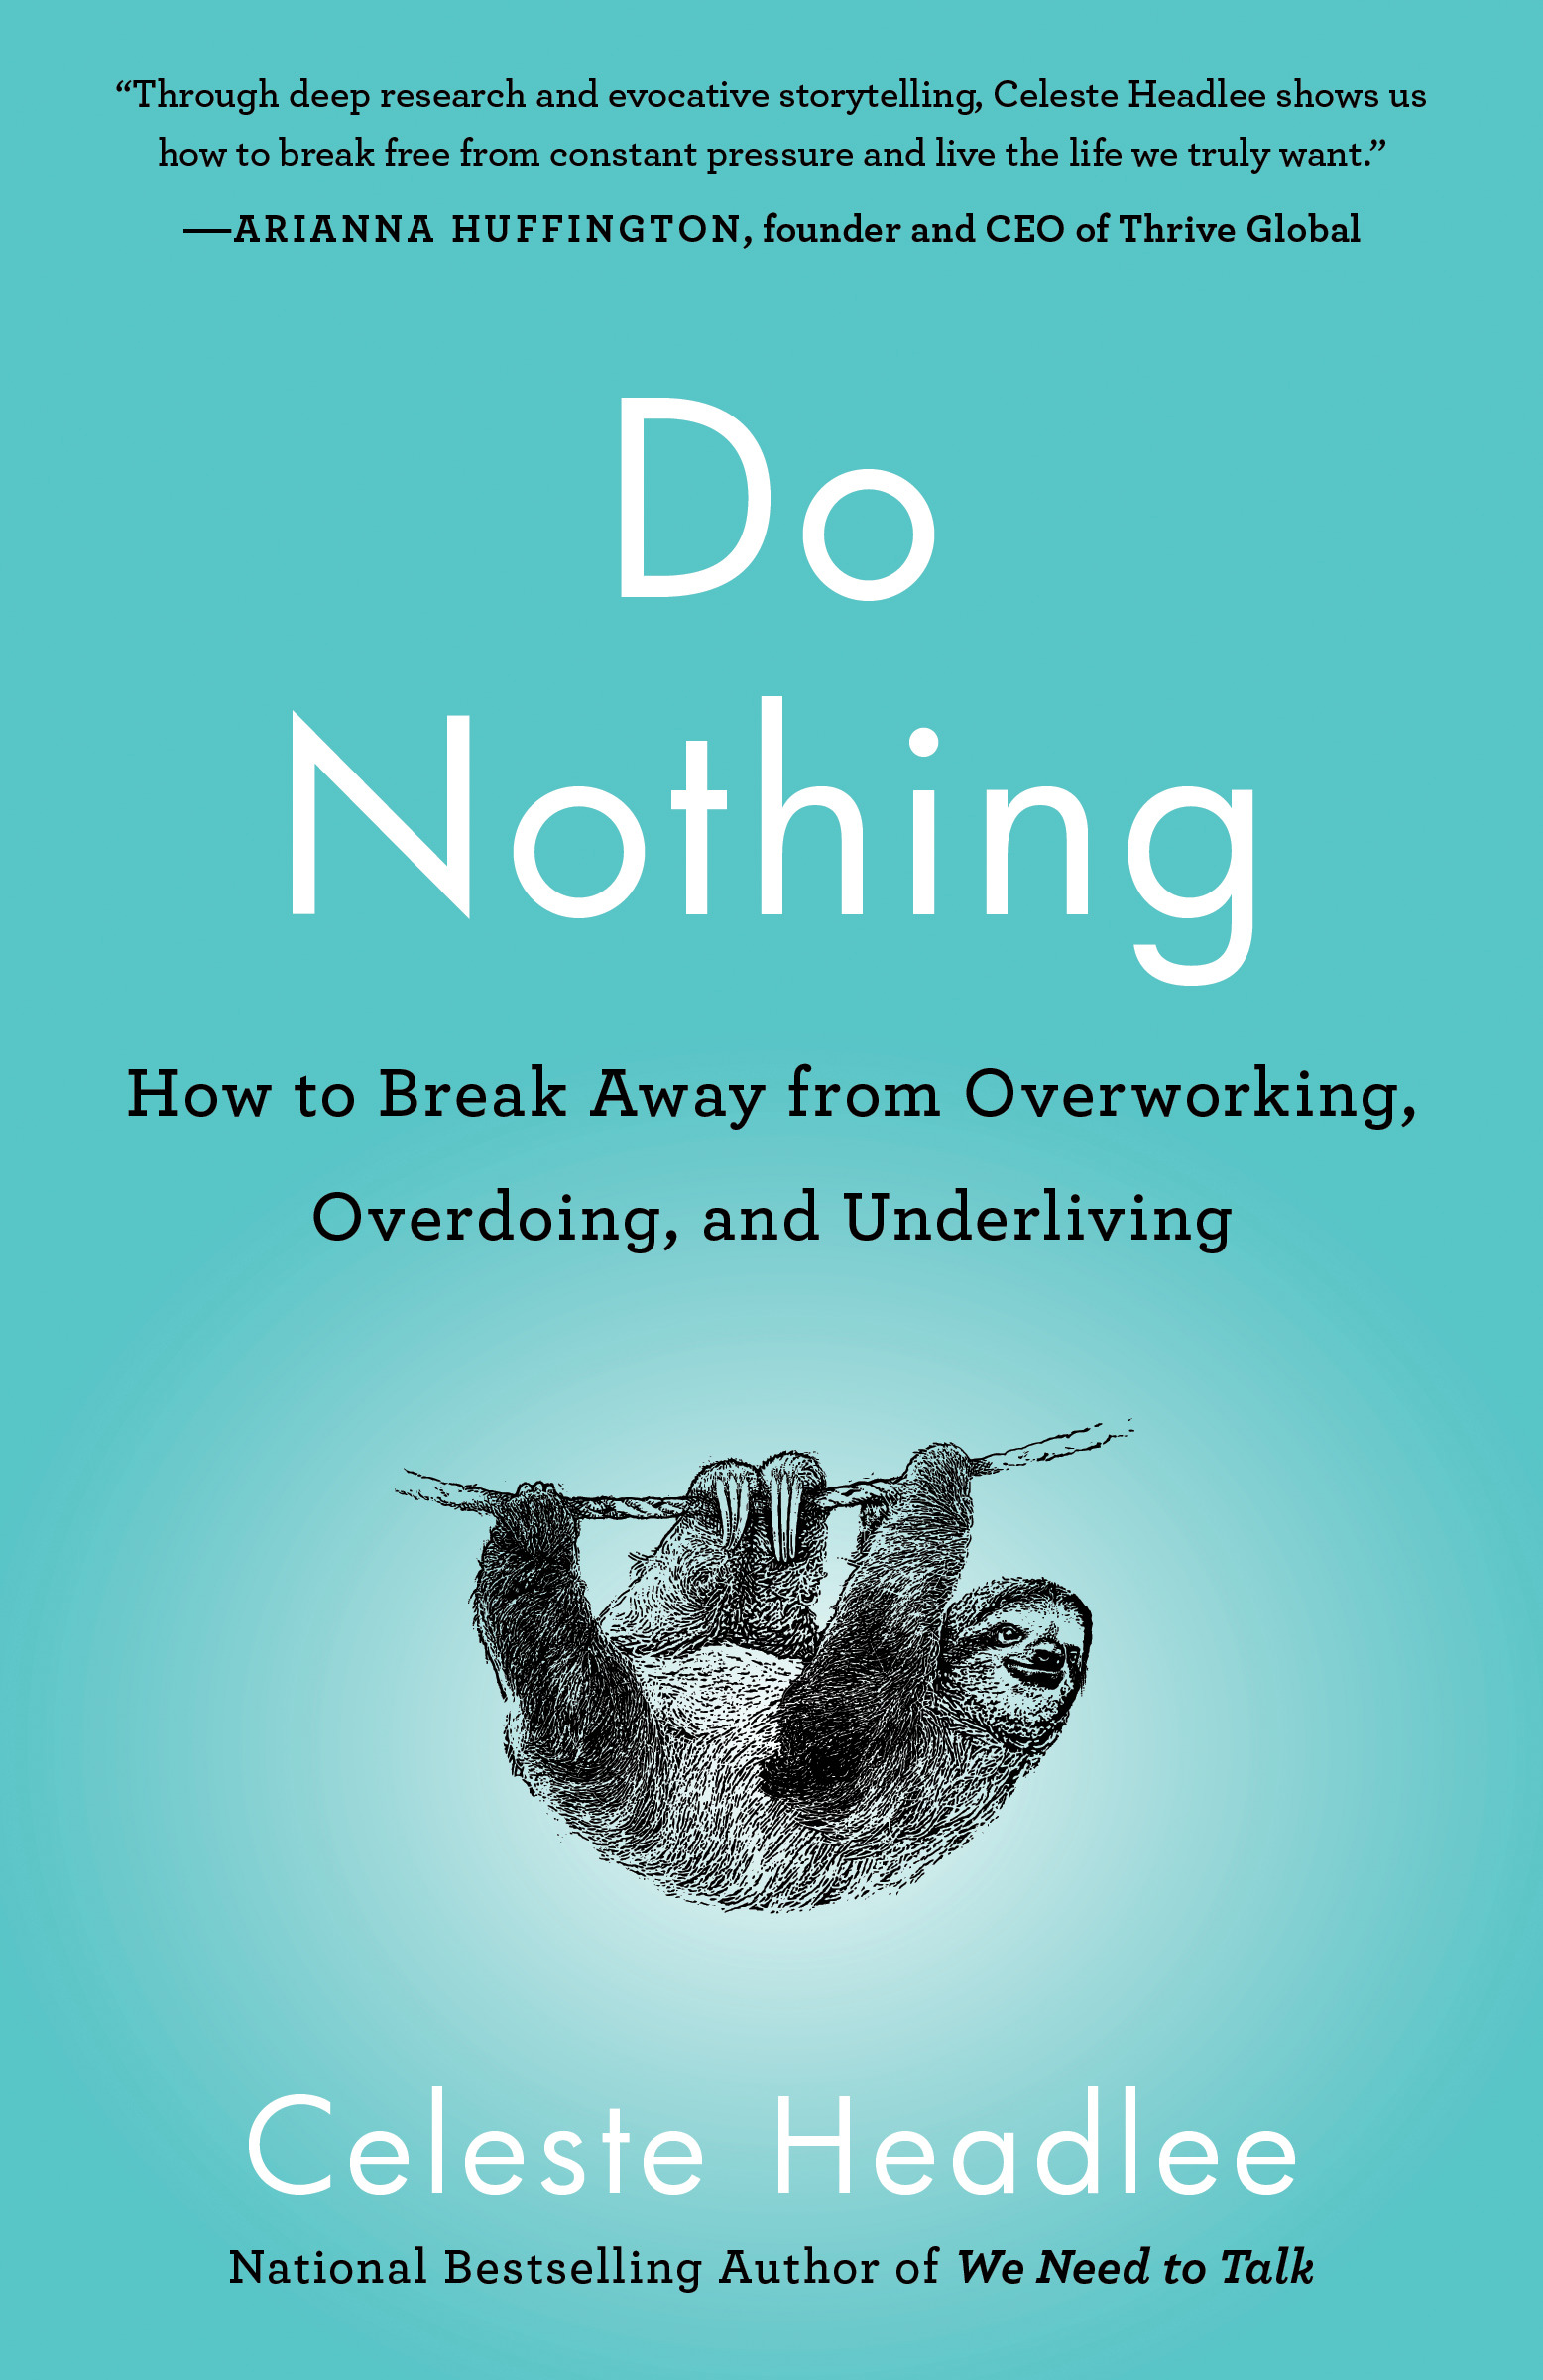 Do Nothing : How to Break Away from Overworking, Overdoing, and Underliving | Psychology & Self-Improvement